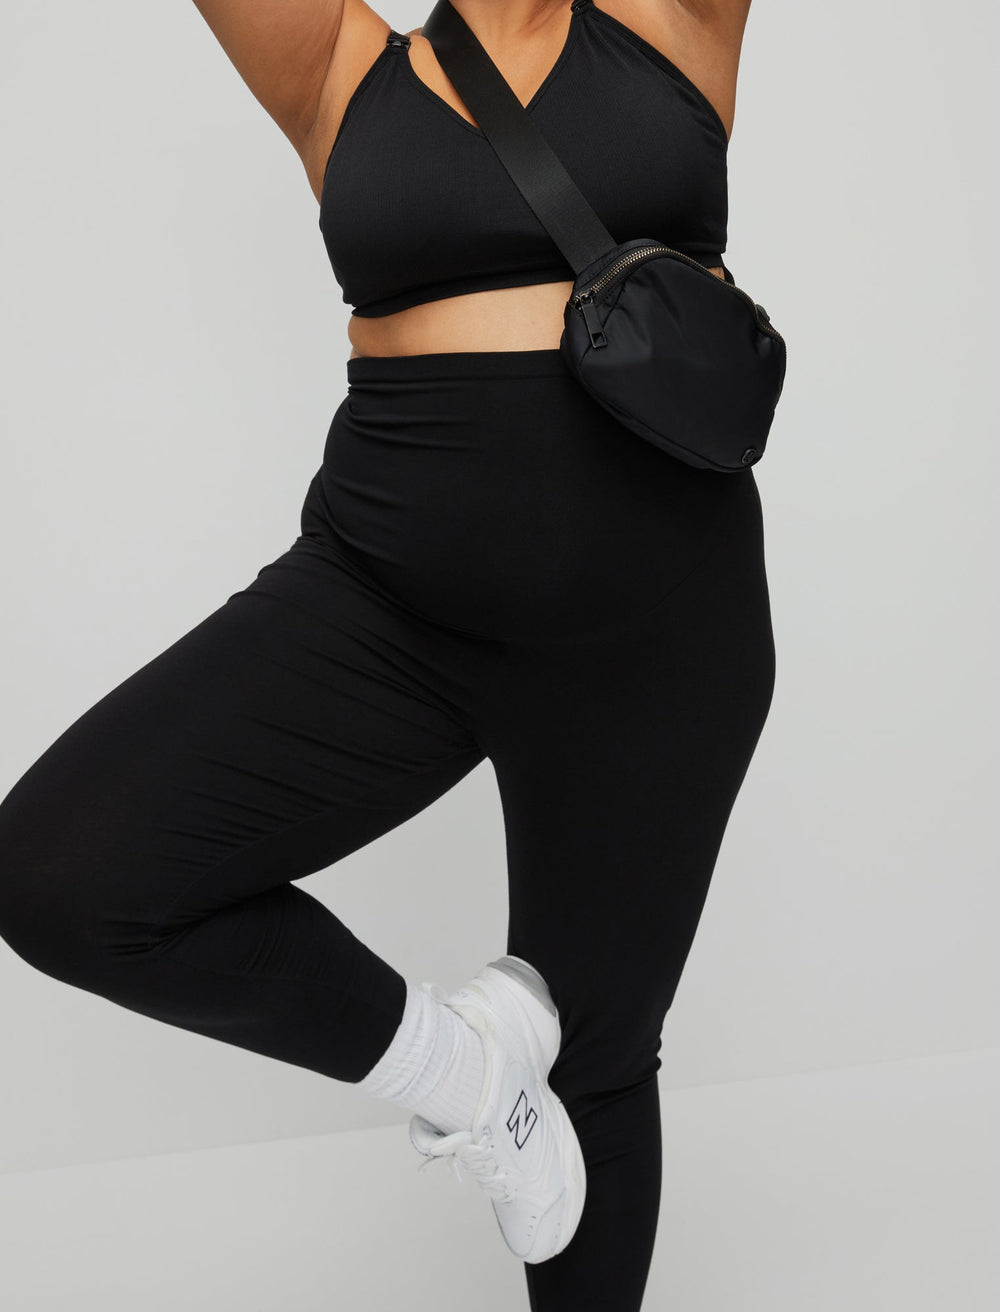 Plus Size Wide Waistband Cable Knit Leggings